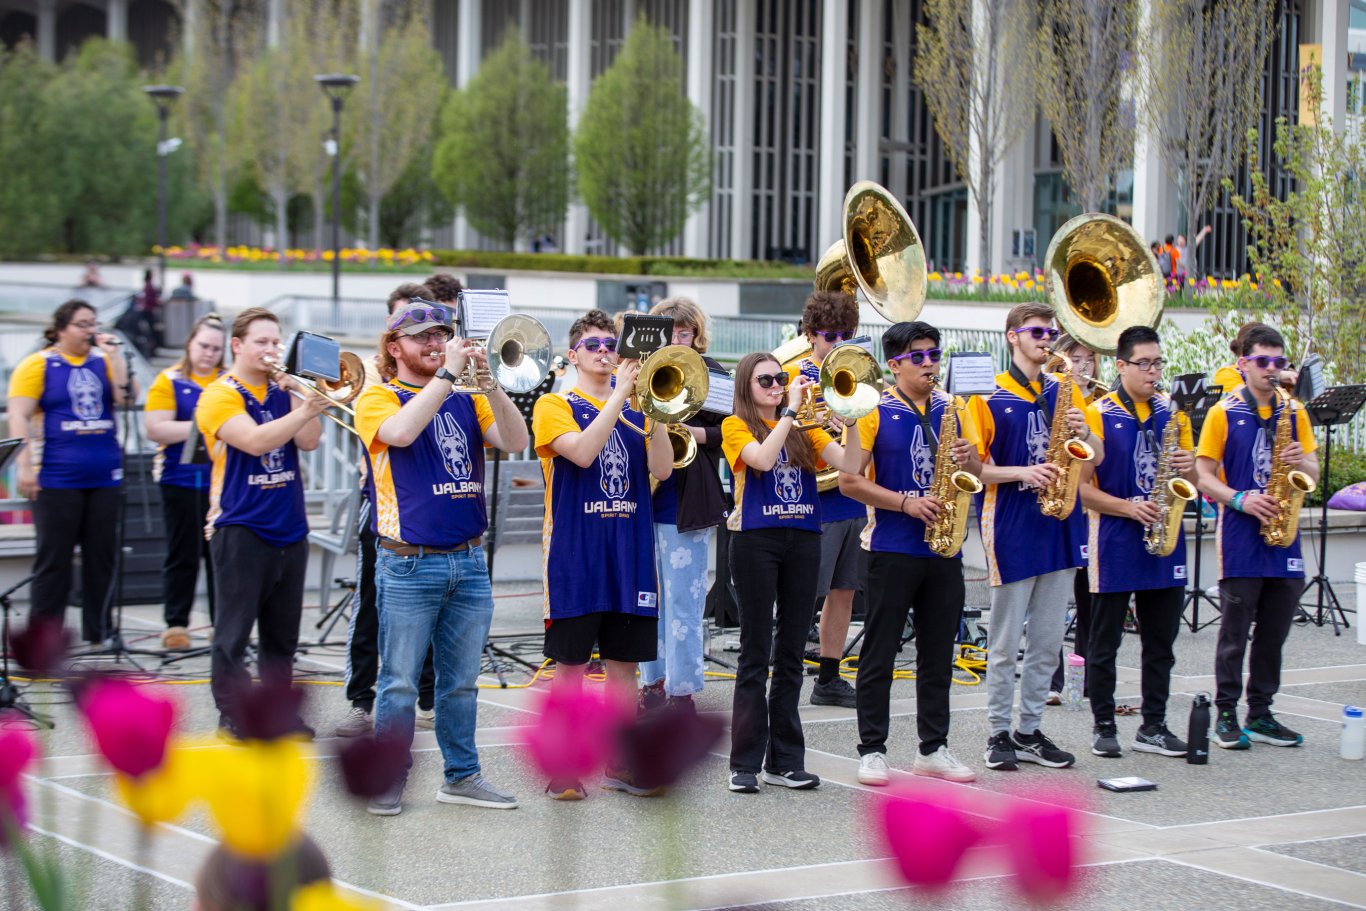 The UAlbany Marching Band plays outdoors on the Academic Podium at UAlbany Showcase. Purple and yellow tulips are visible in the foreground.